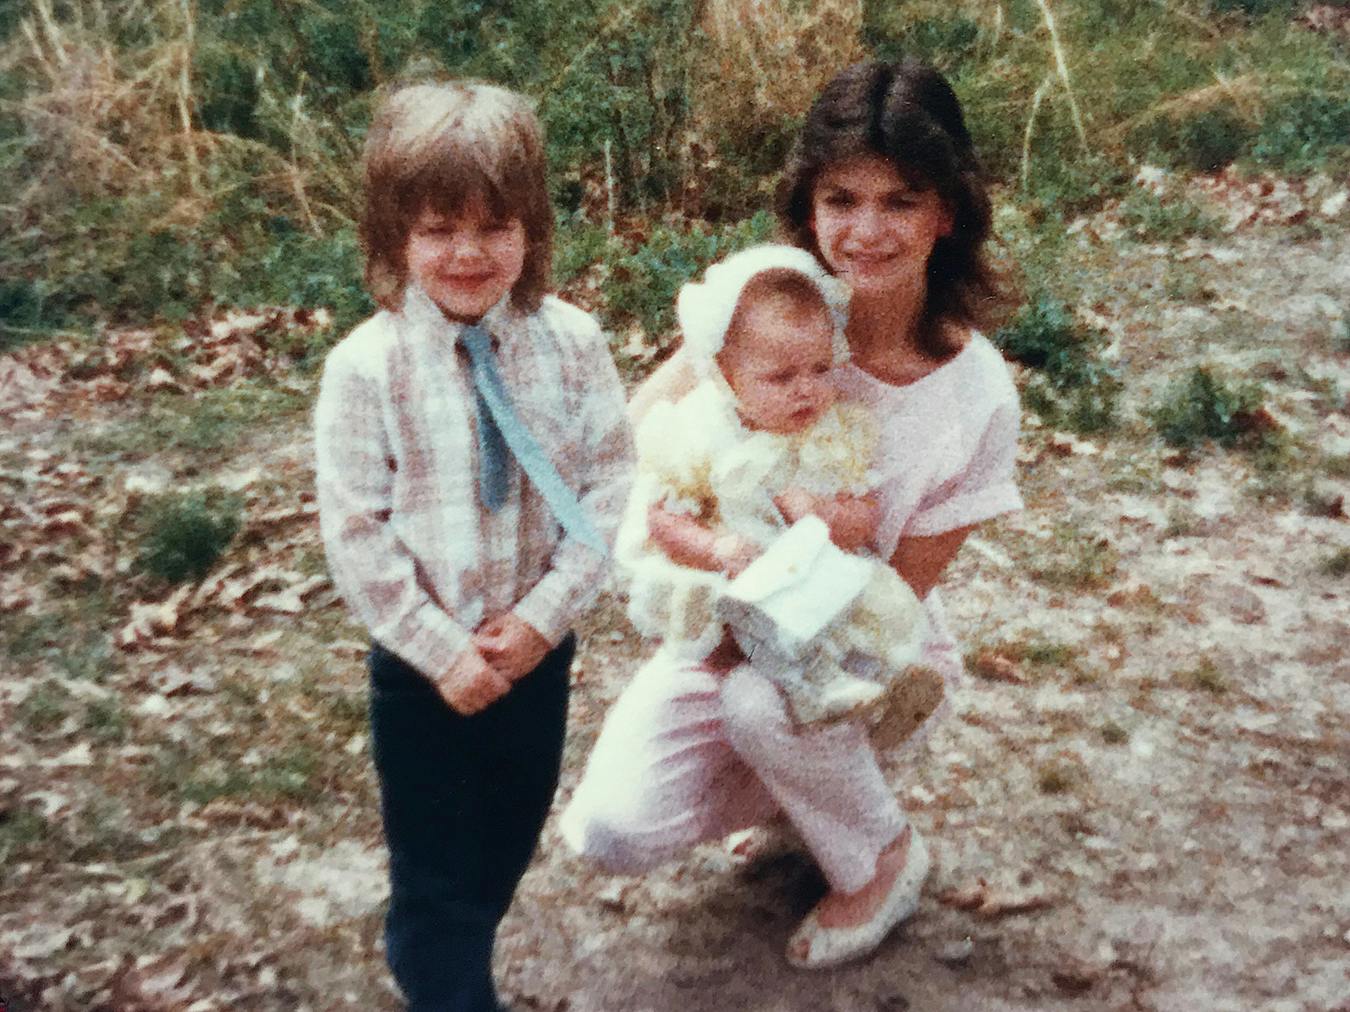 A young Bobby Estell and his sister, Amanda Estell, and his mother, Pamela Hurt, in Arkansas.